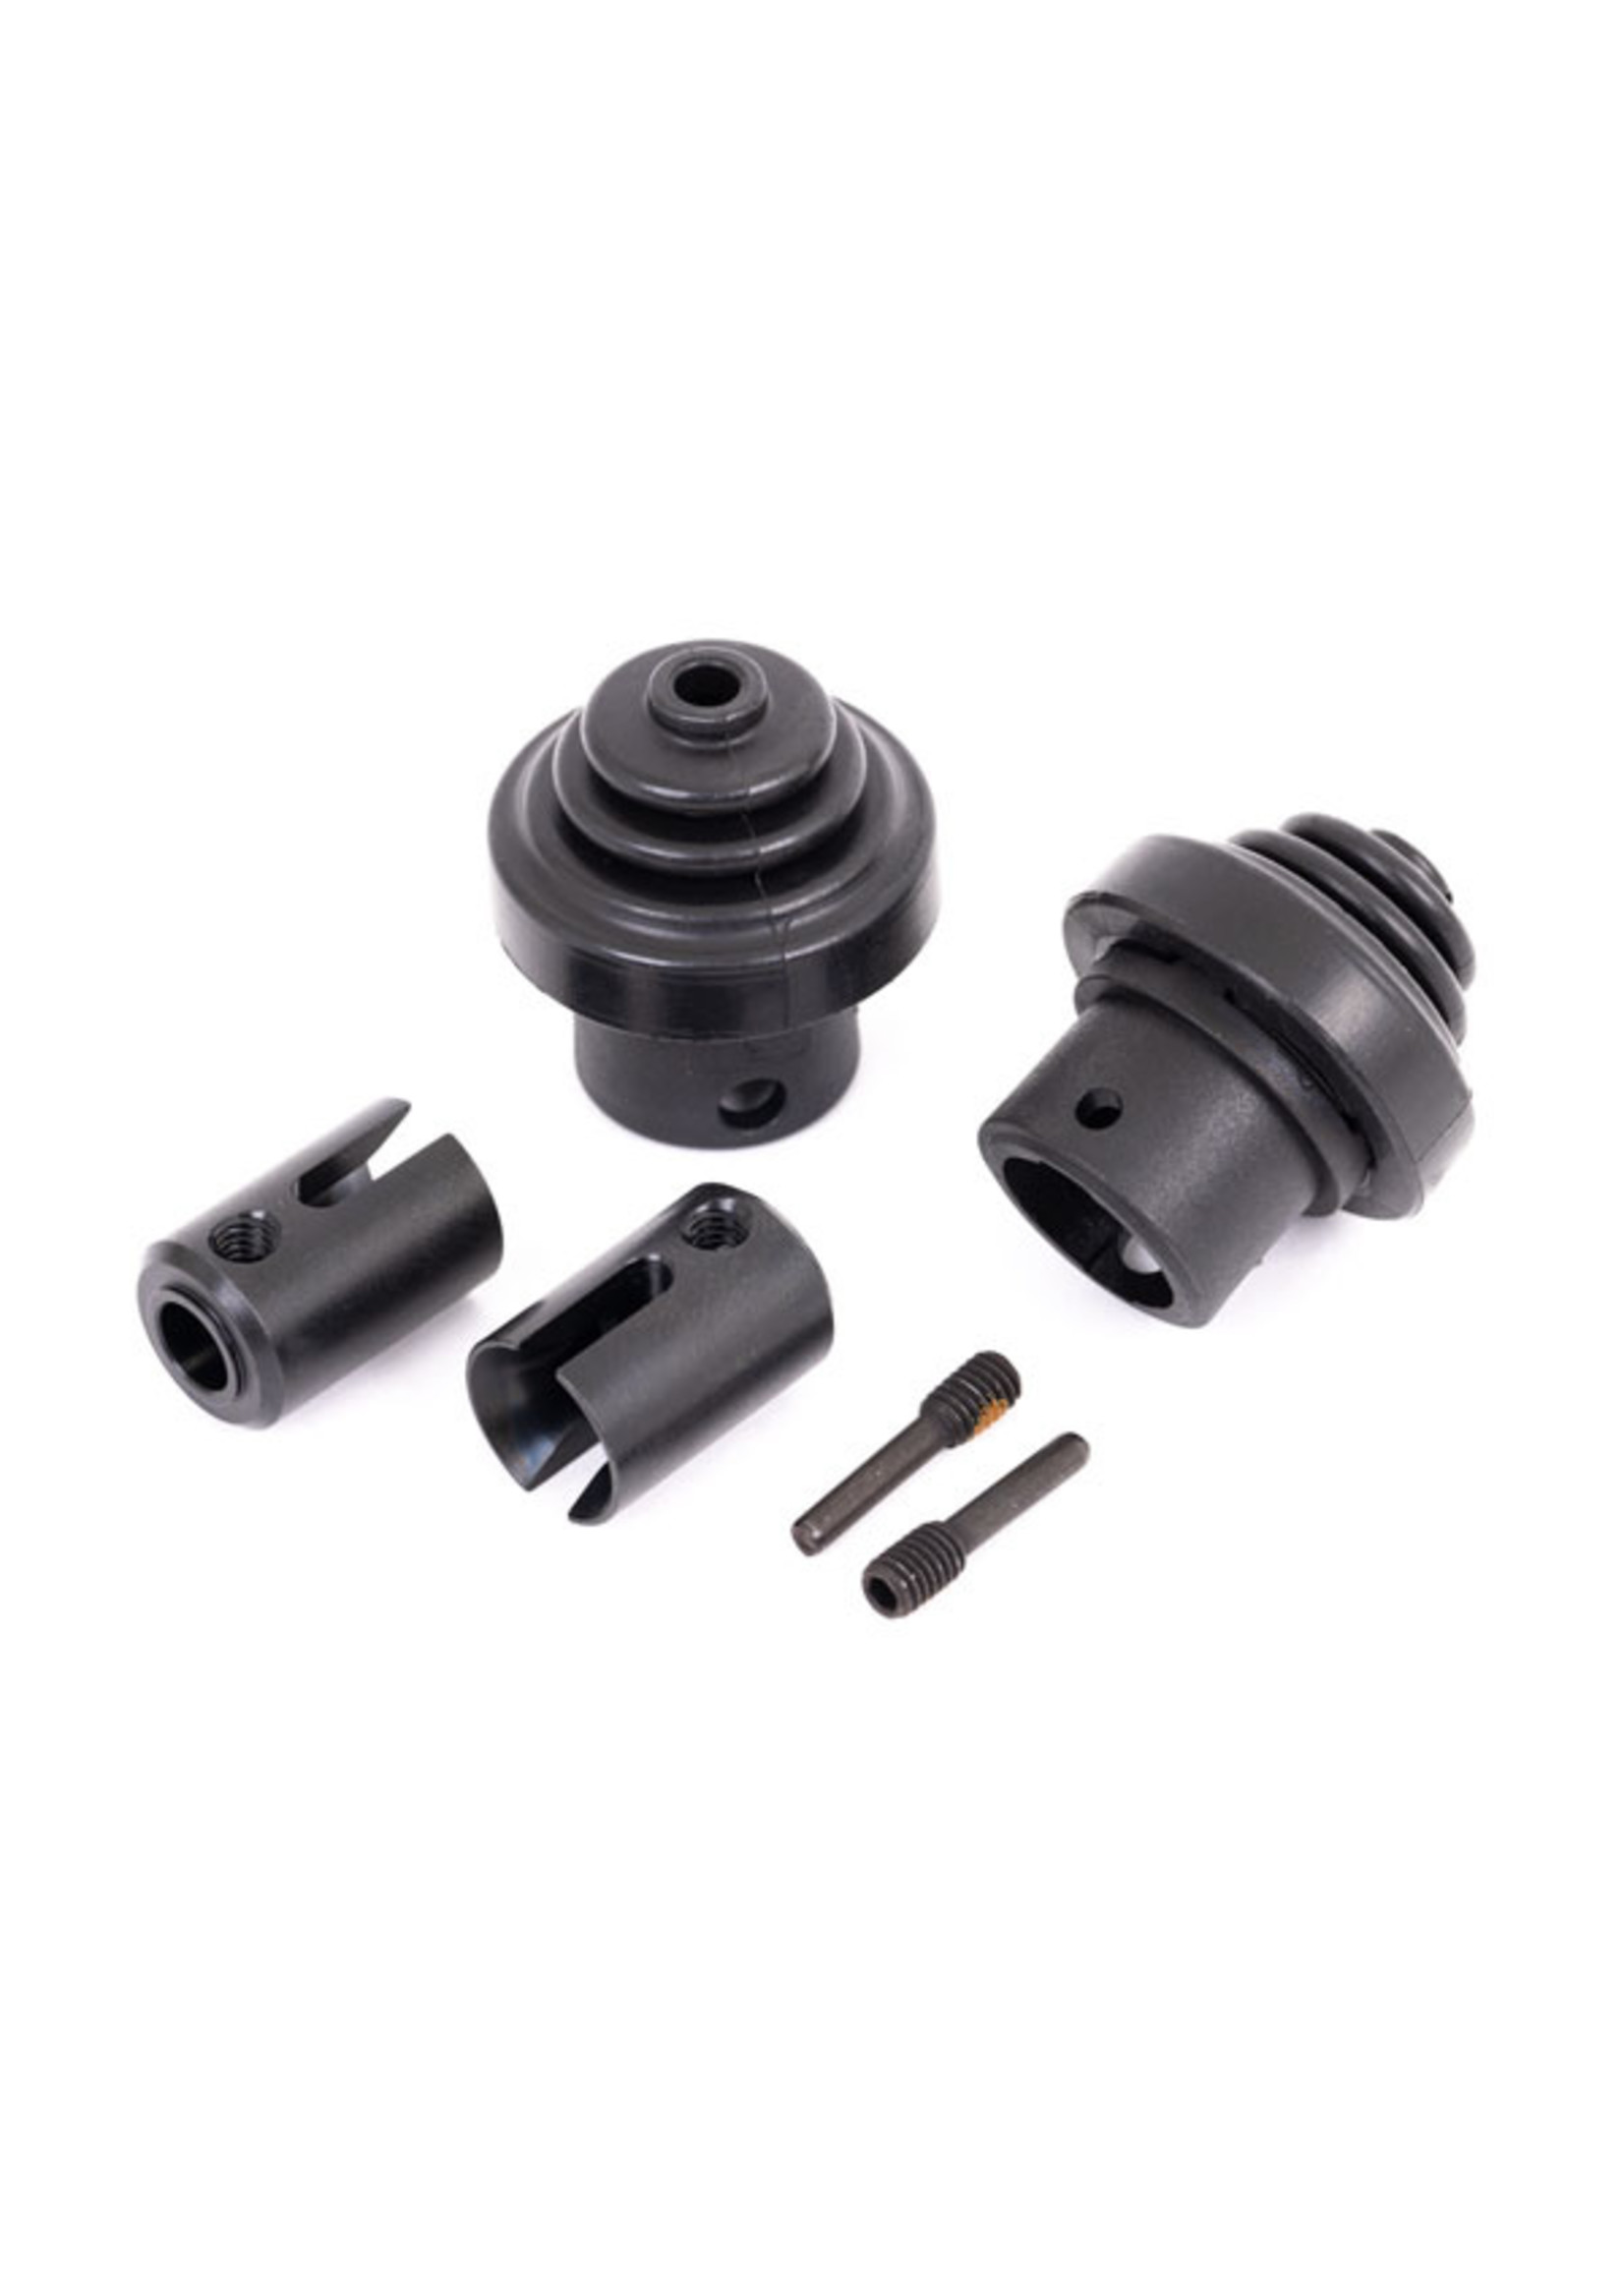 Traxxas 9587 - Drive Cup, Front or Rear, Hardened